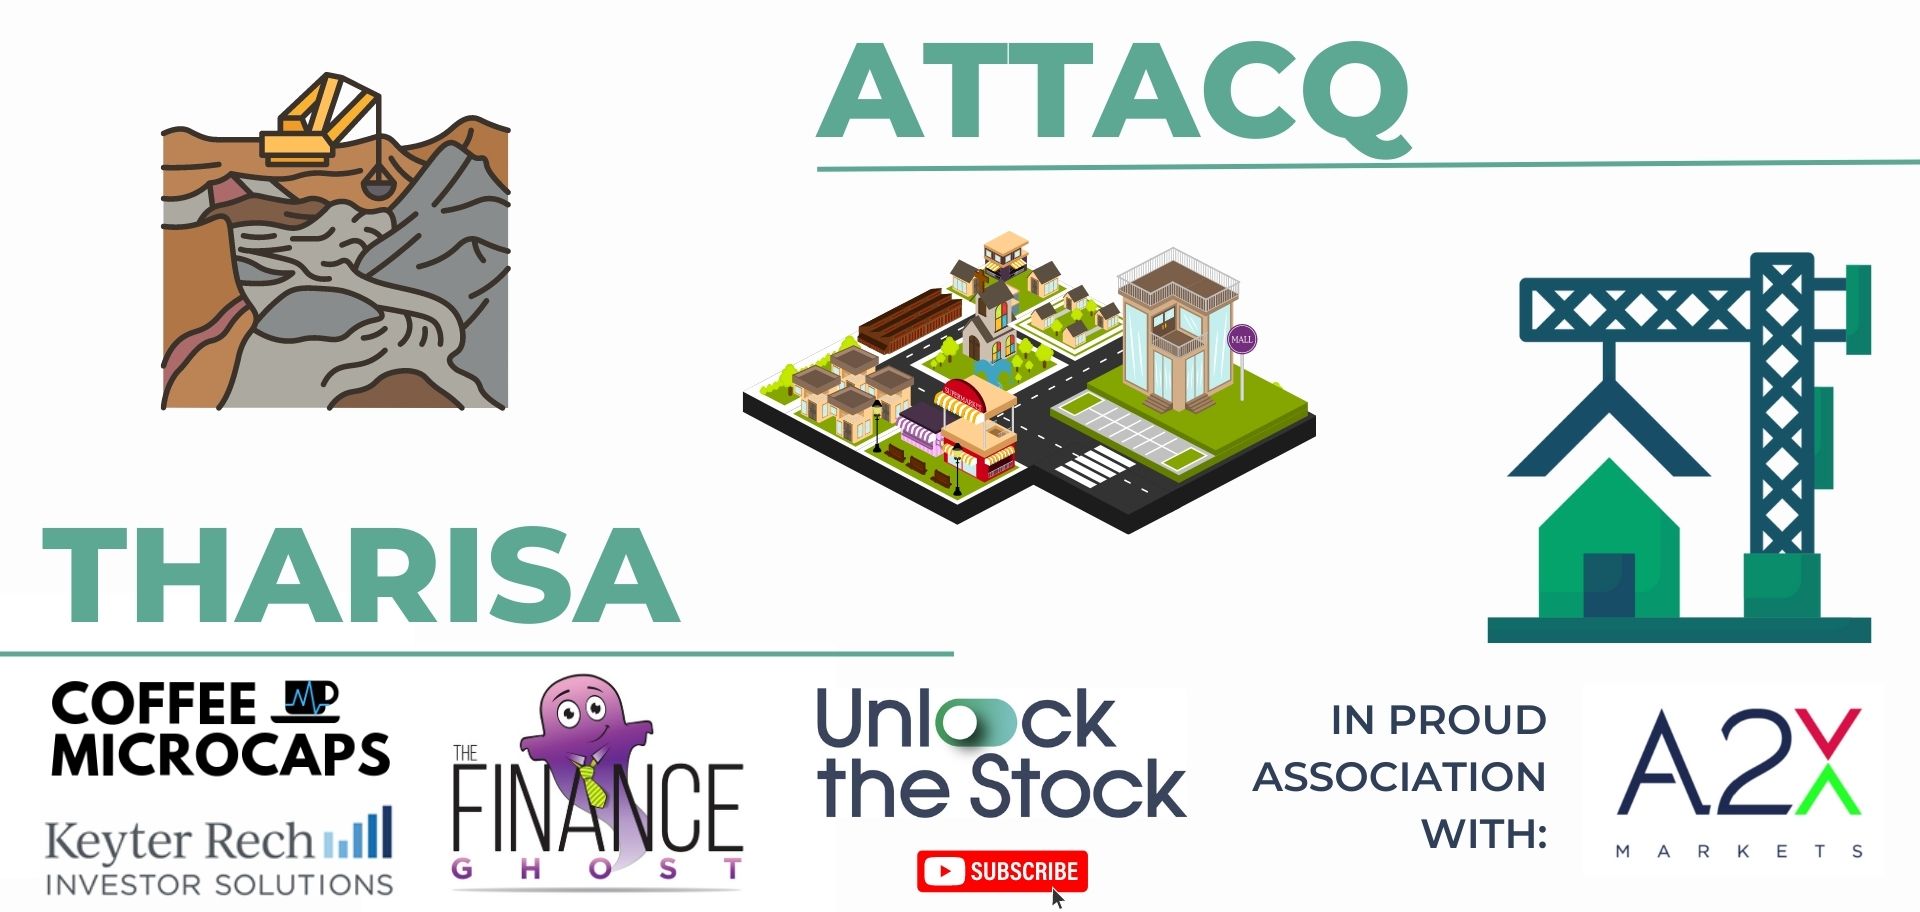 Unlock the Stock: Attacq and Tharisa